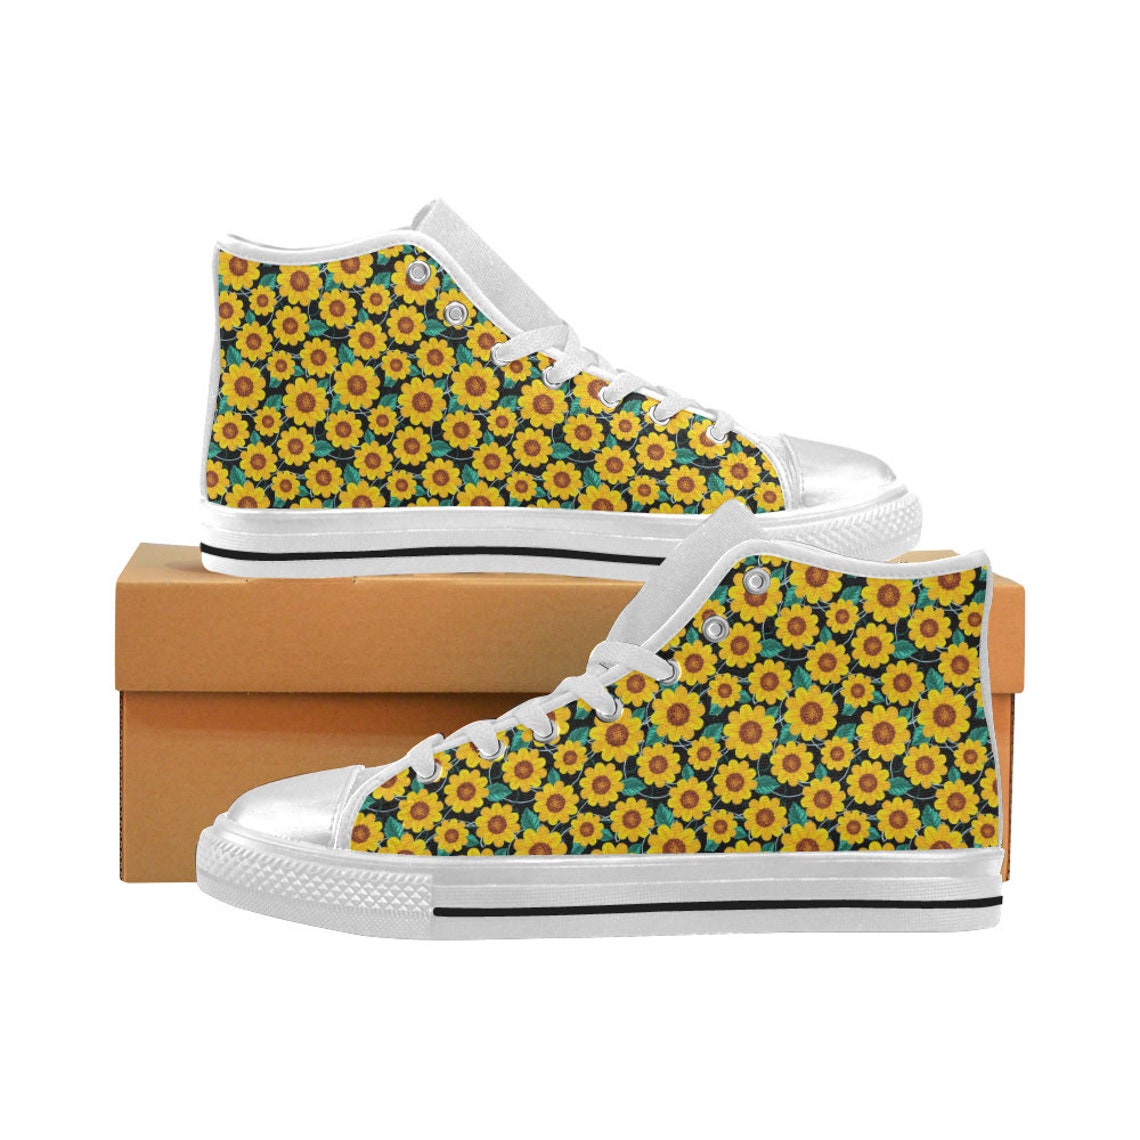 Sunflower Women High Top Canvas Shoes Cute Yellow Flowers | Etsy